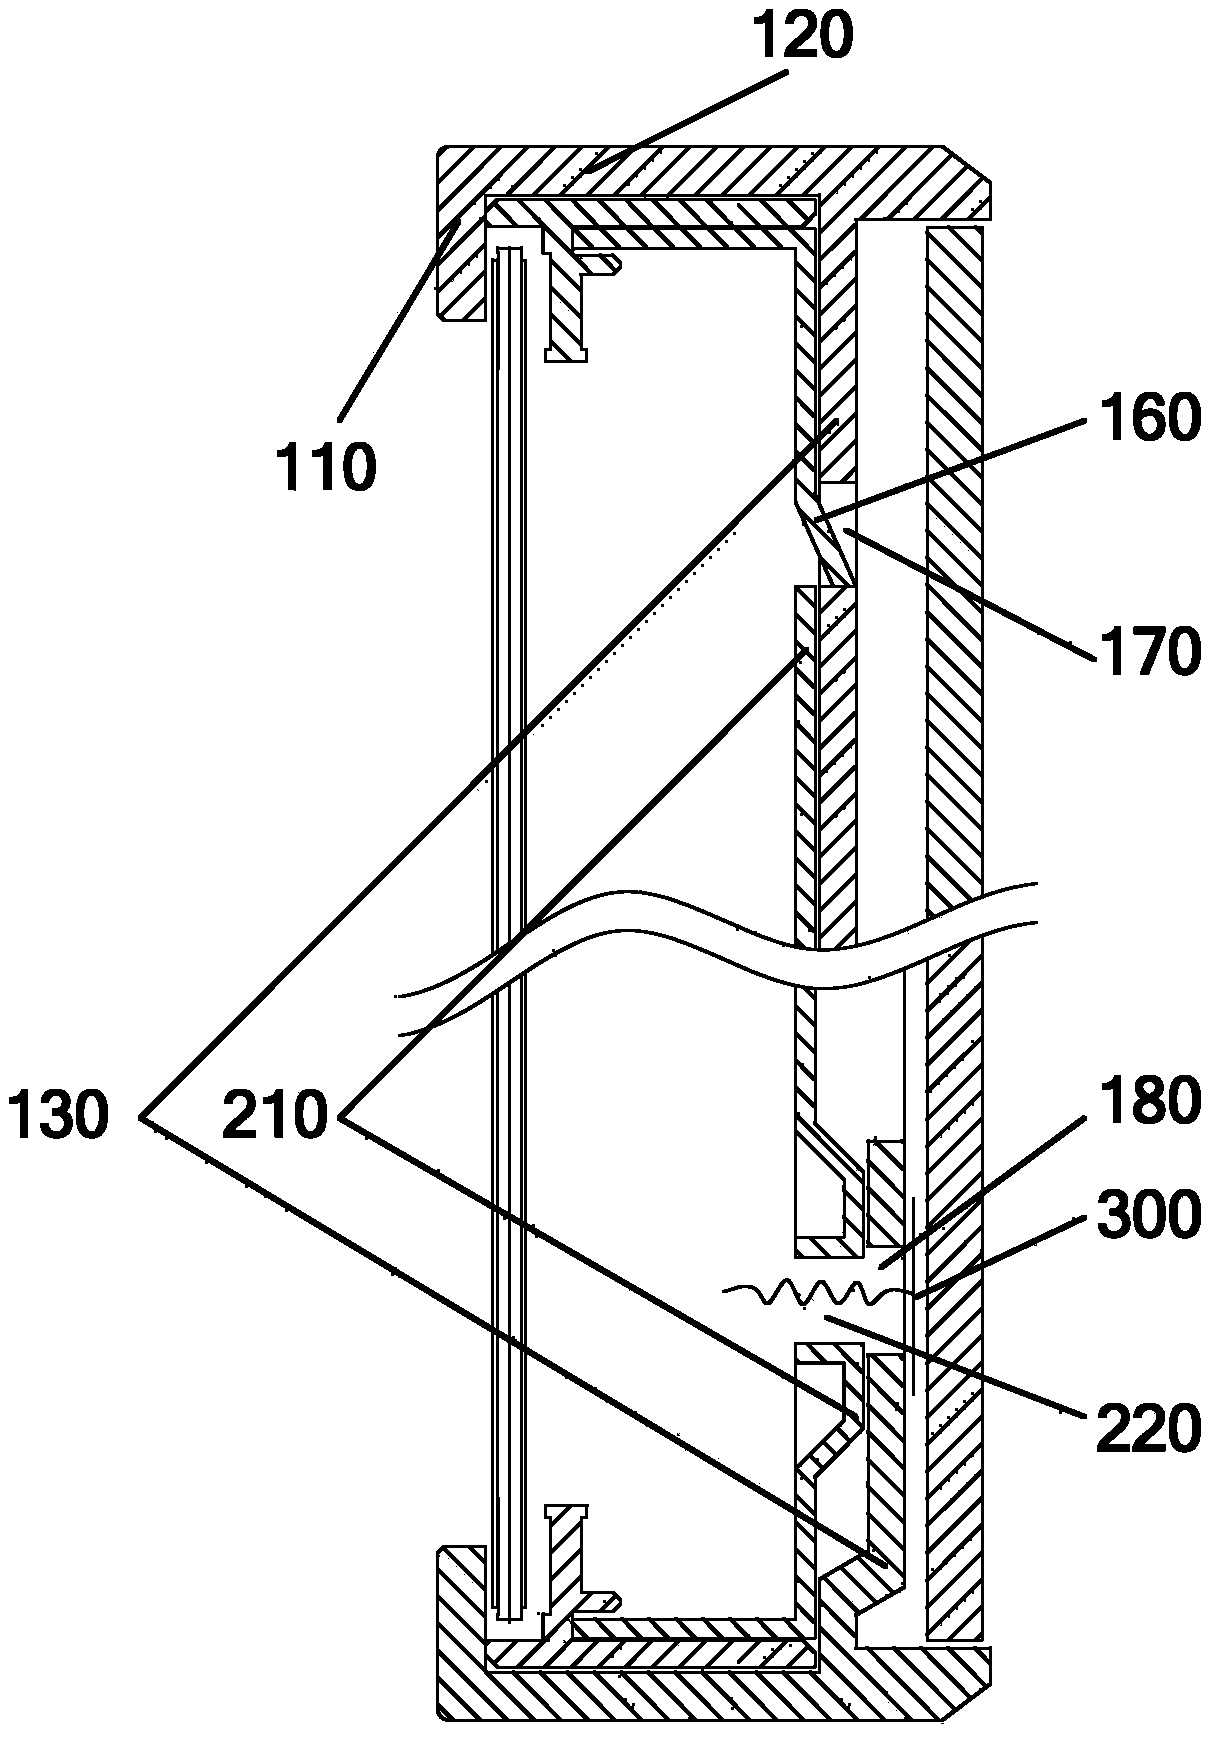 Display device and television